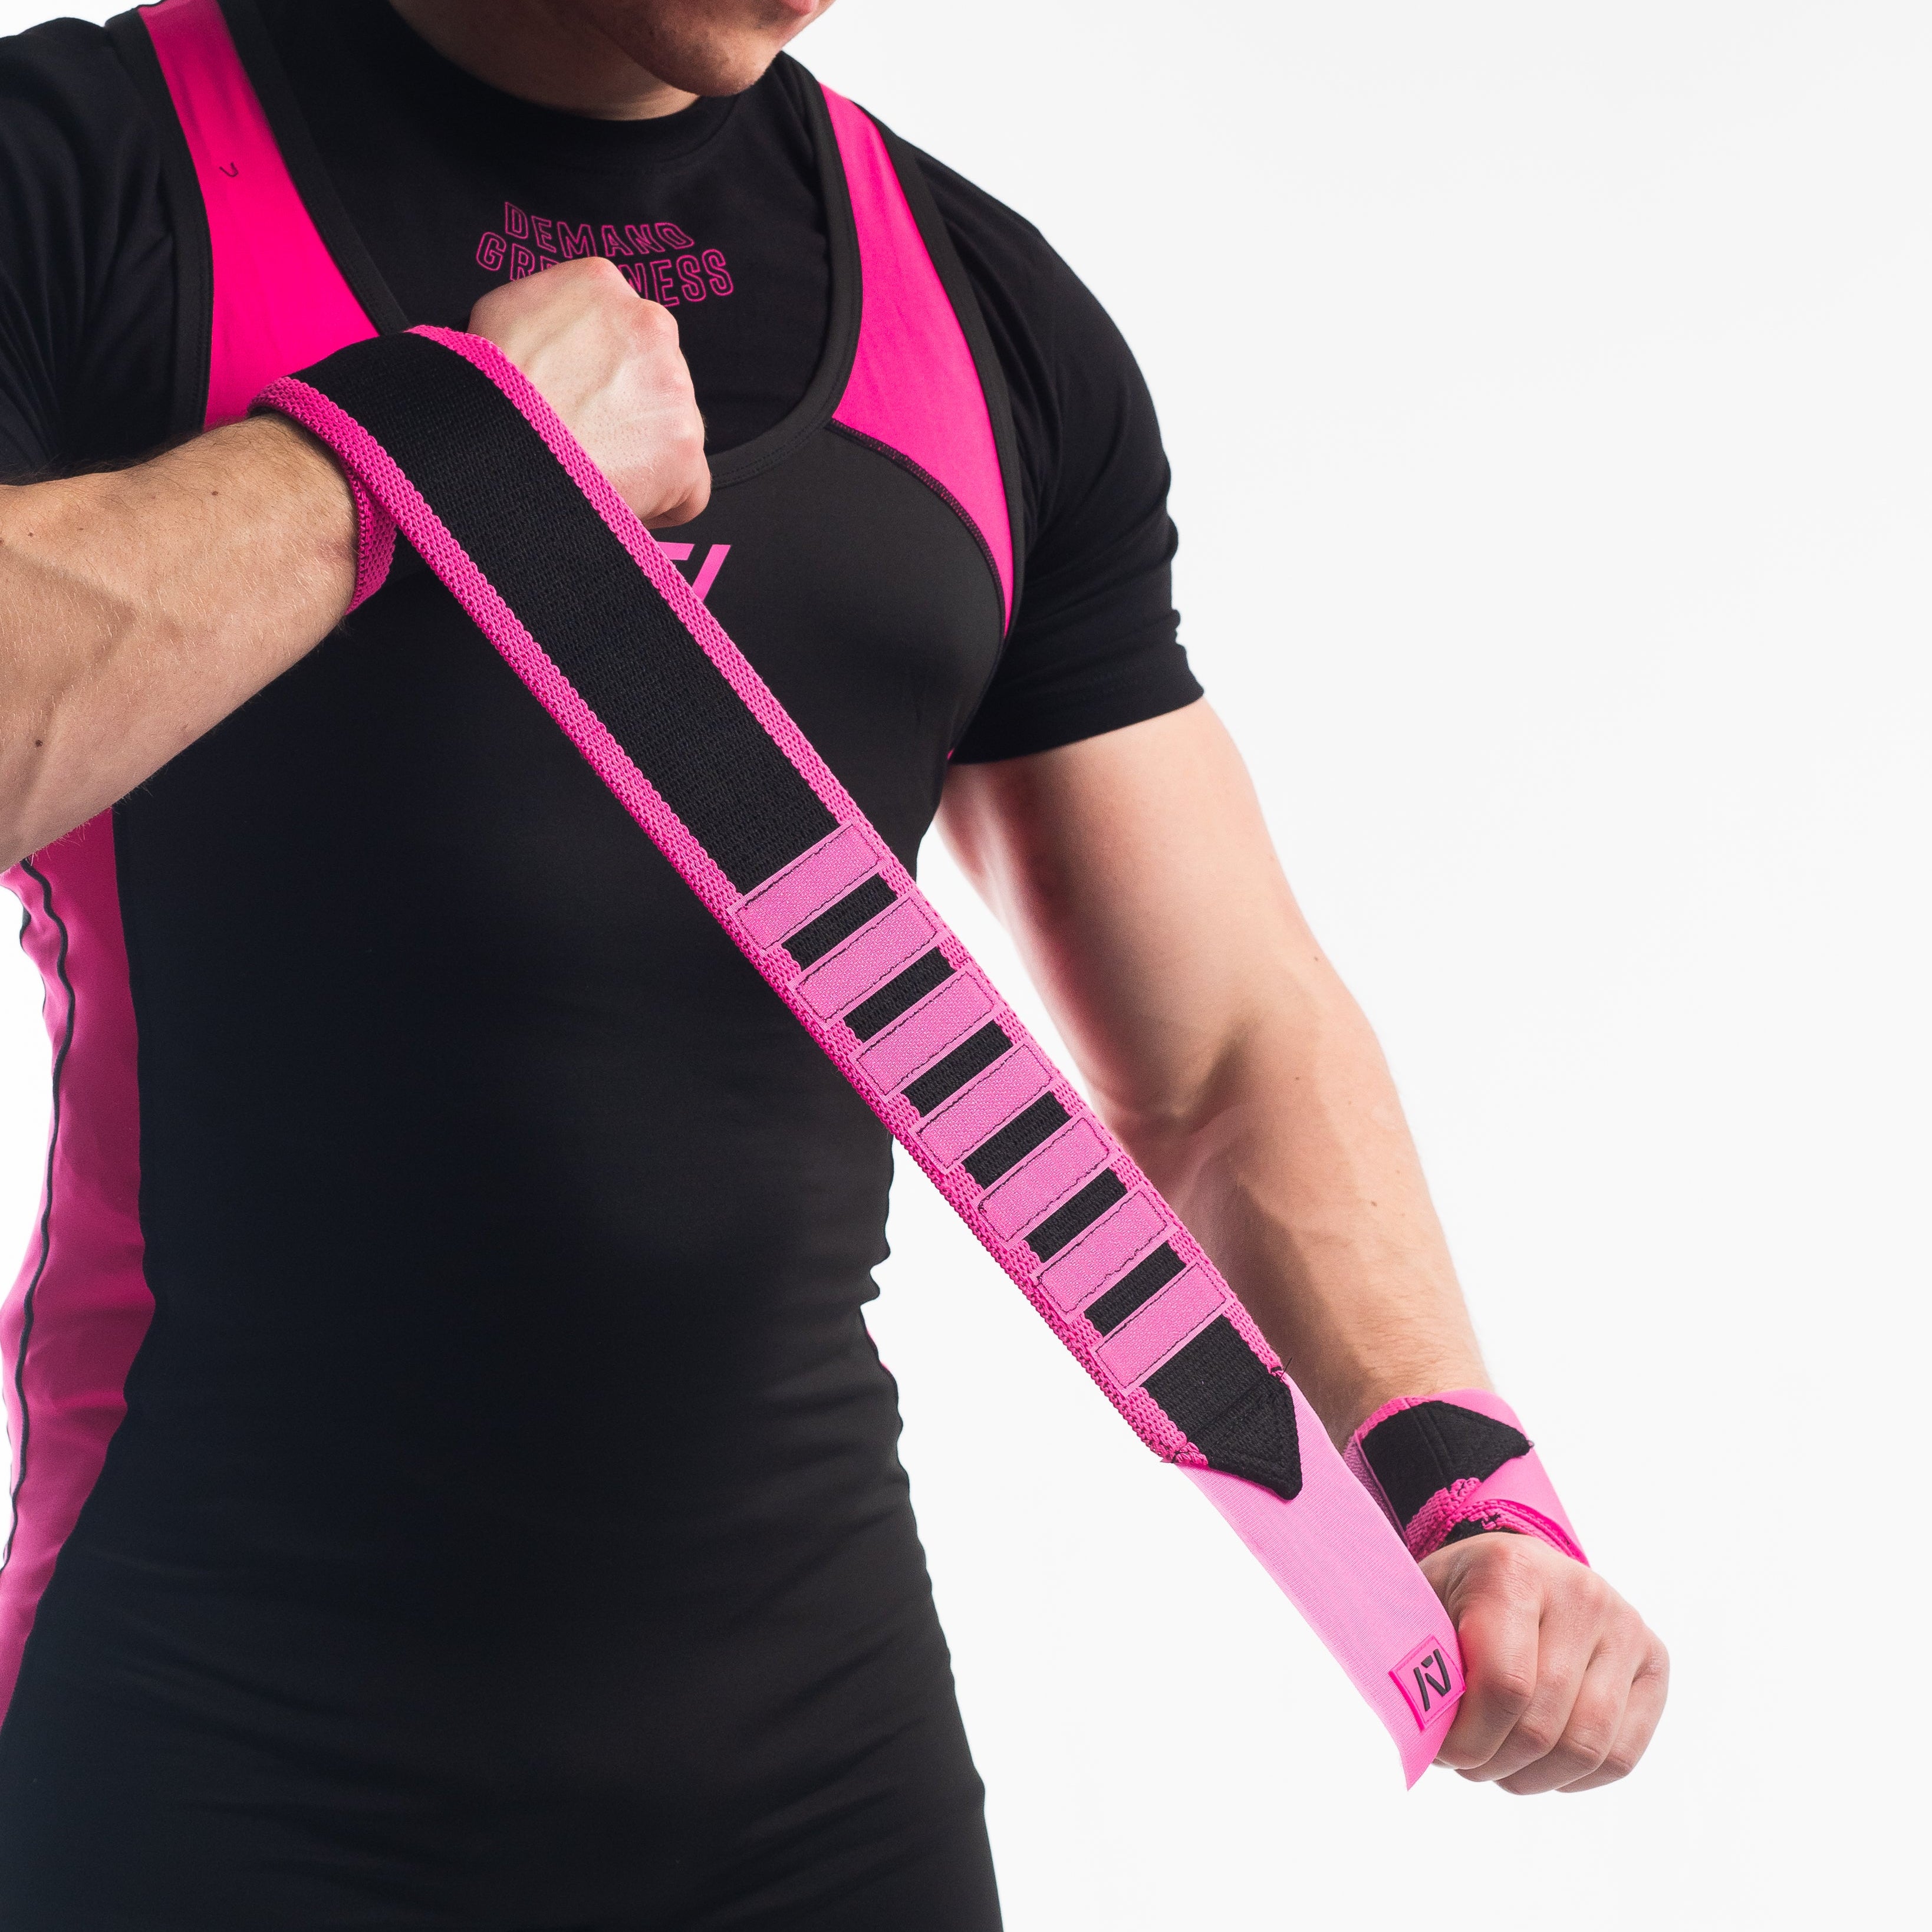 A7 IPF Approved Zebra Wraps feature strips of velcro on the wraps, allowing Zebra Wraps to conform fully to your unique preference of tightness. We offer Zebra wrist wraps in 3 lengths and 4 stiffnesses (Flexi, Mids, Stiff, and Rigor Mortis). The IPF Approved Kit includes Powerlifting Singlet, A7 Meet Shirt, A7 Zebra Wrist Wraps, A7 Deadlift Socks, Hourglass Knee Sleeves (Stiff Knee Sleeves and Rigor Mortis Knee Sleeves). All A7 Powerlifting Equipment shipping to UK, Norway, Switzerland and Iceland.